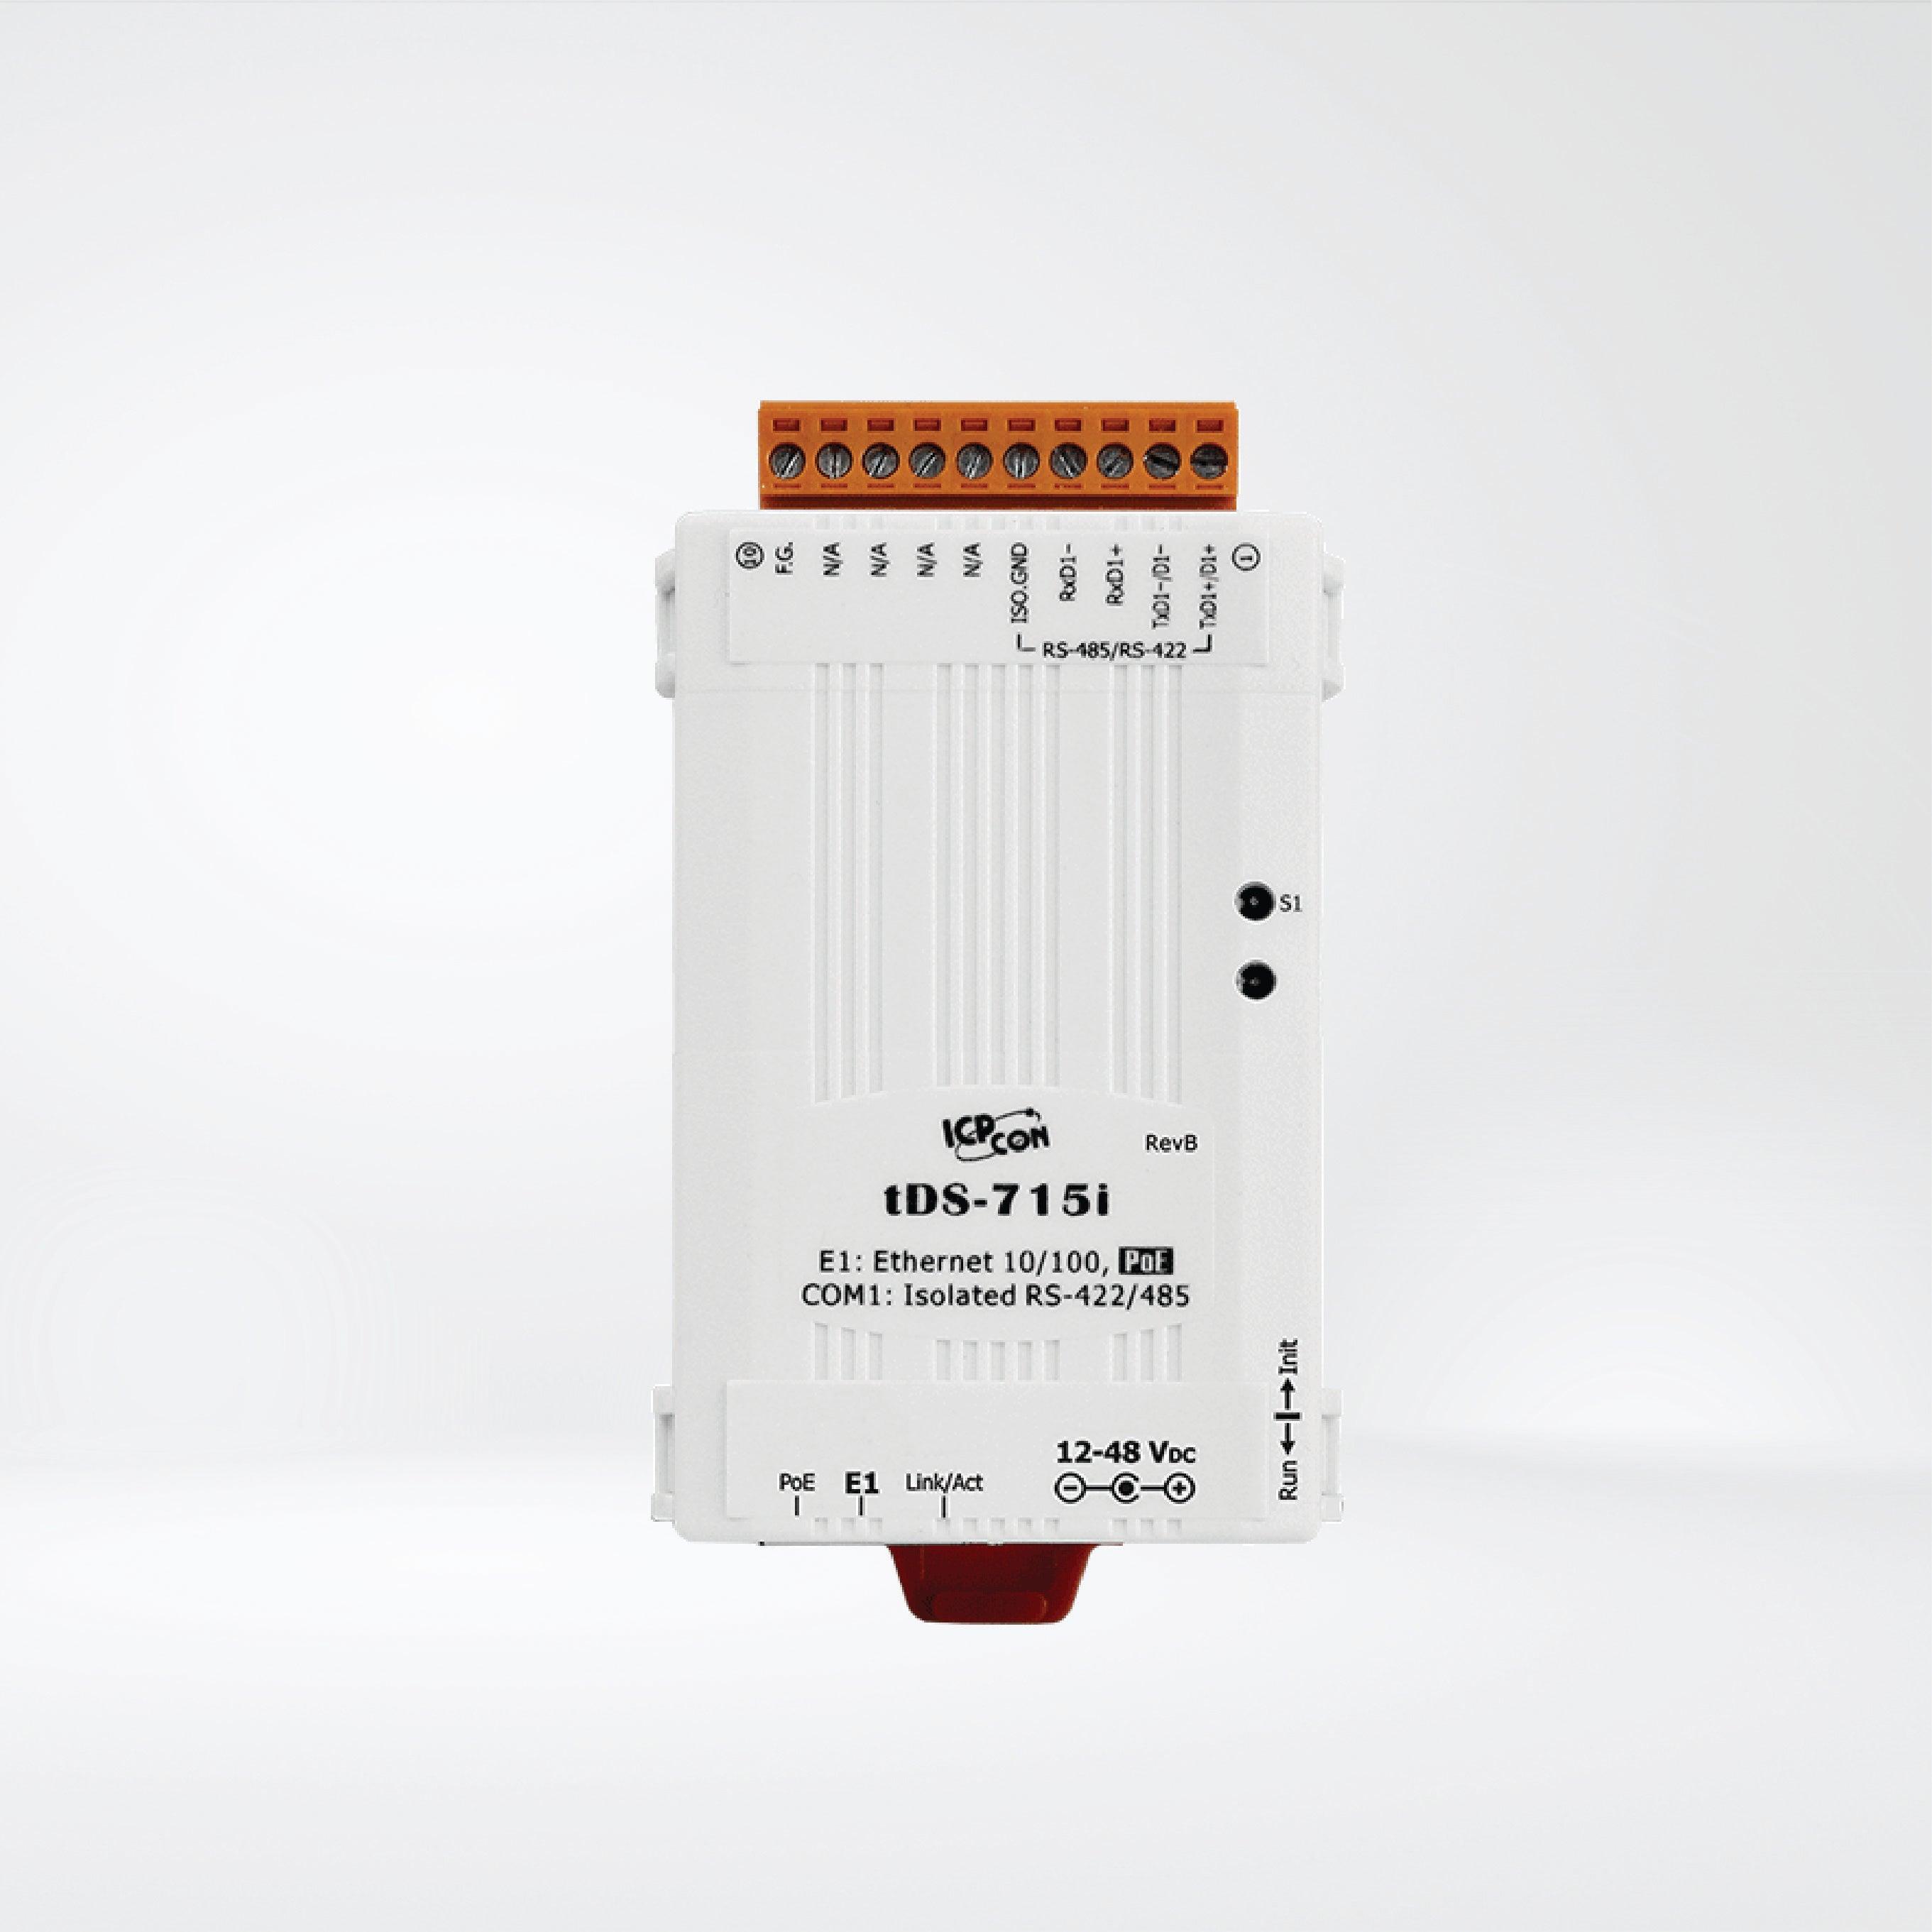 tDS-715i CR Tiny (1x Isolated RS-422/485) Serial-to-Ethernet Device Server with PoE - Riverplus